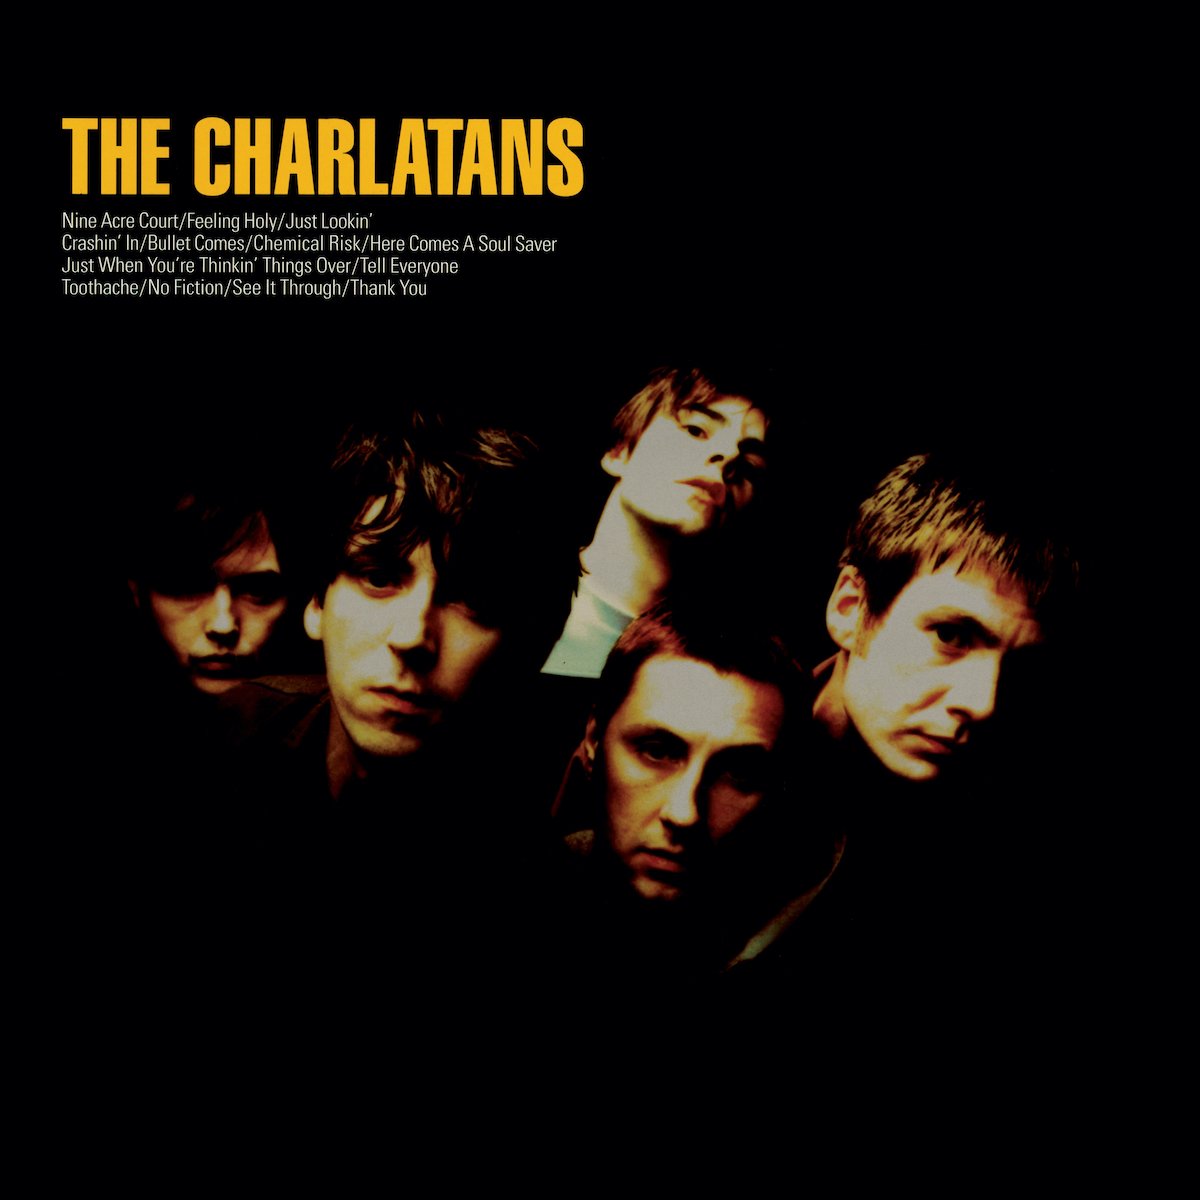 The Charlatans - The Charlatans (Marbled Yellow Vinyl)